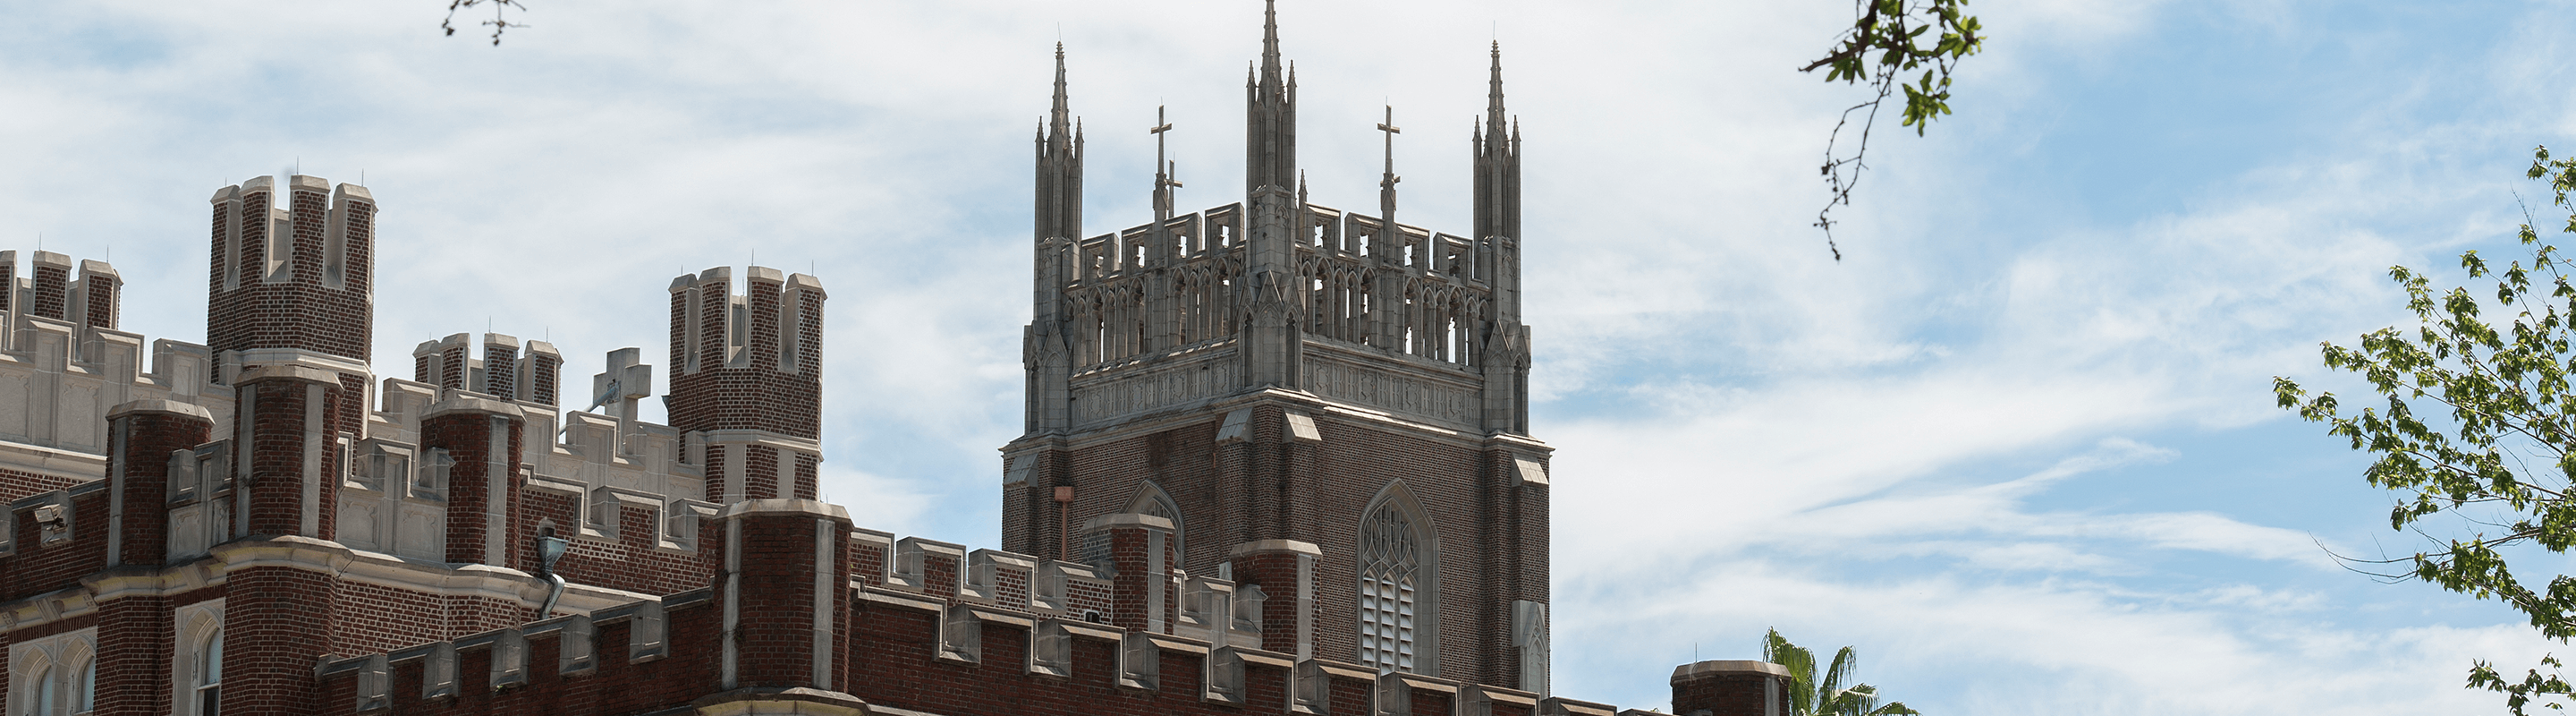 Image of tower of Marquette Hall against blue sky, 3/4 view